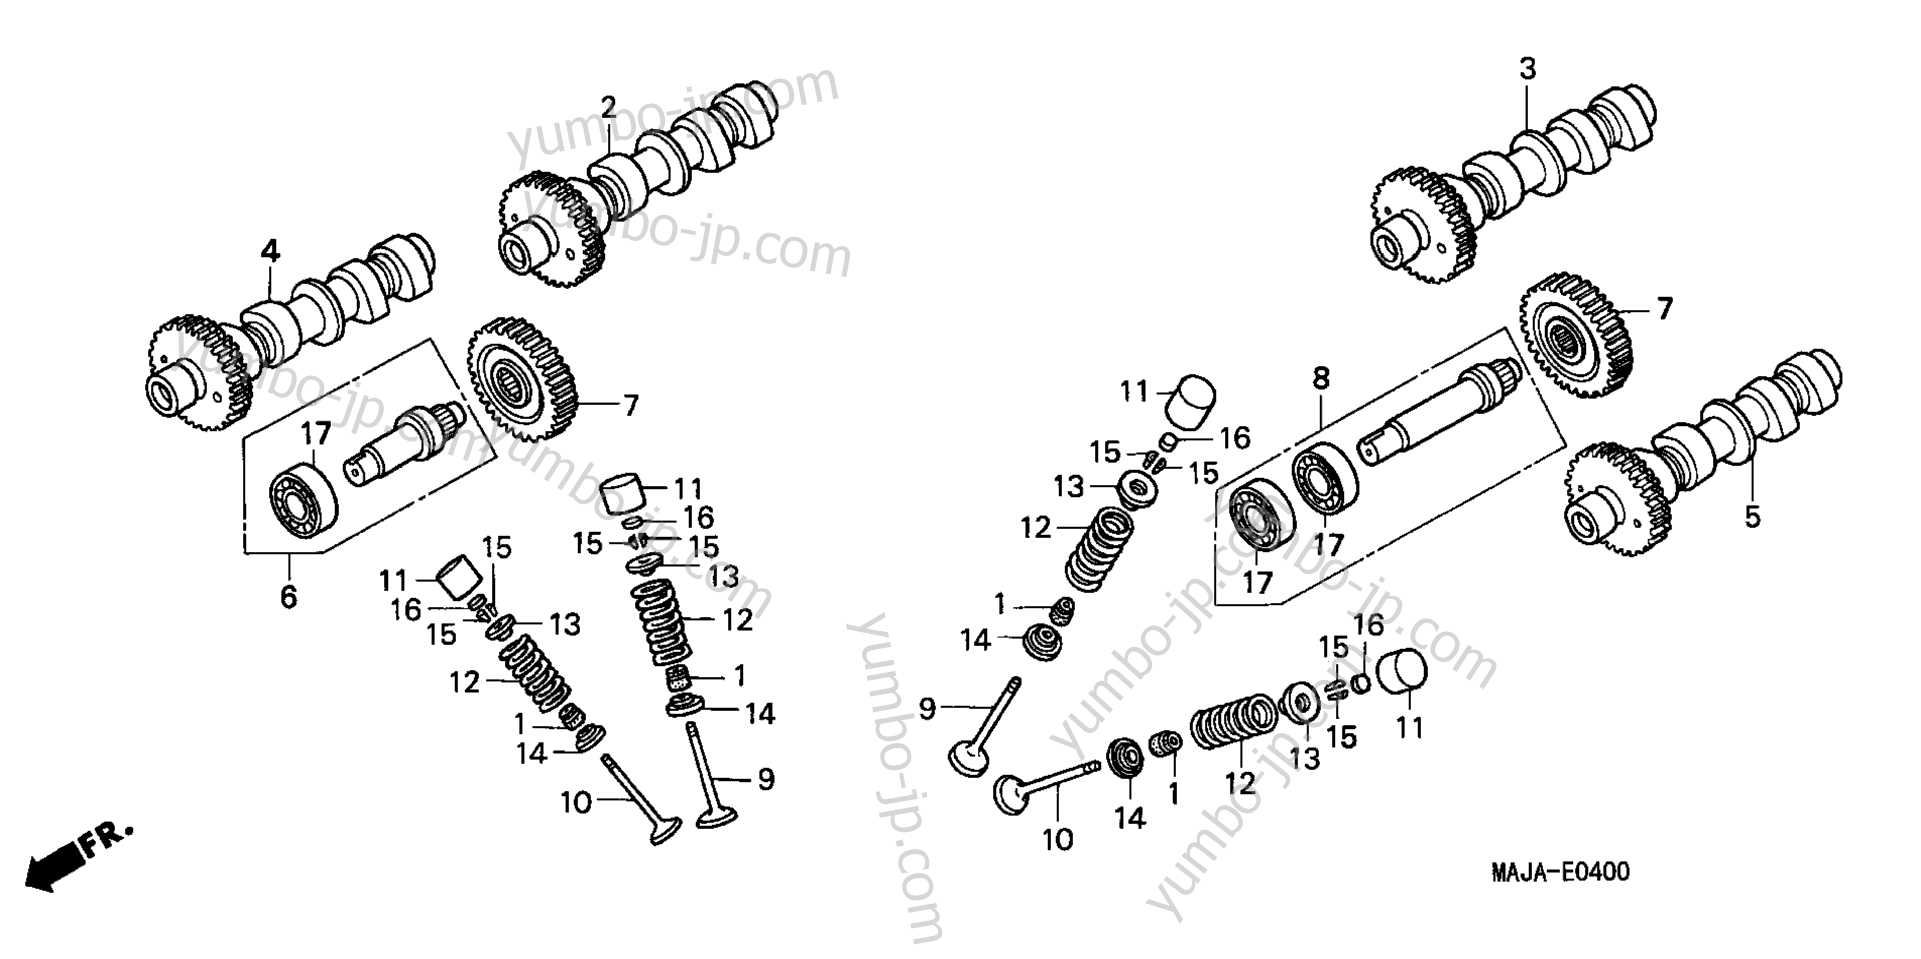 CAMSHAFT / VALVE for motorcycles HONDA ST1100A A 2001 year